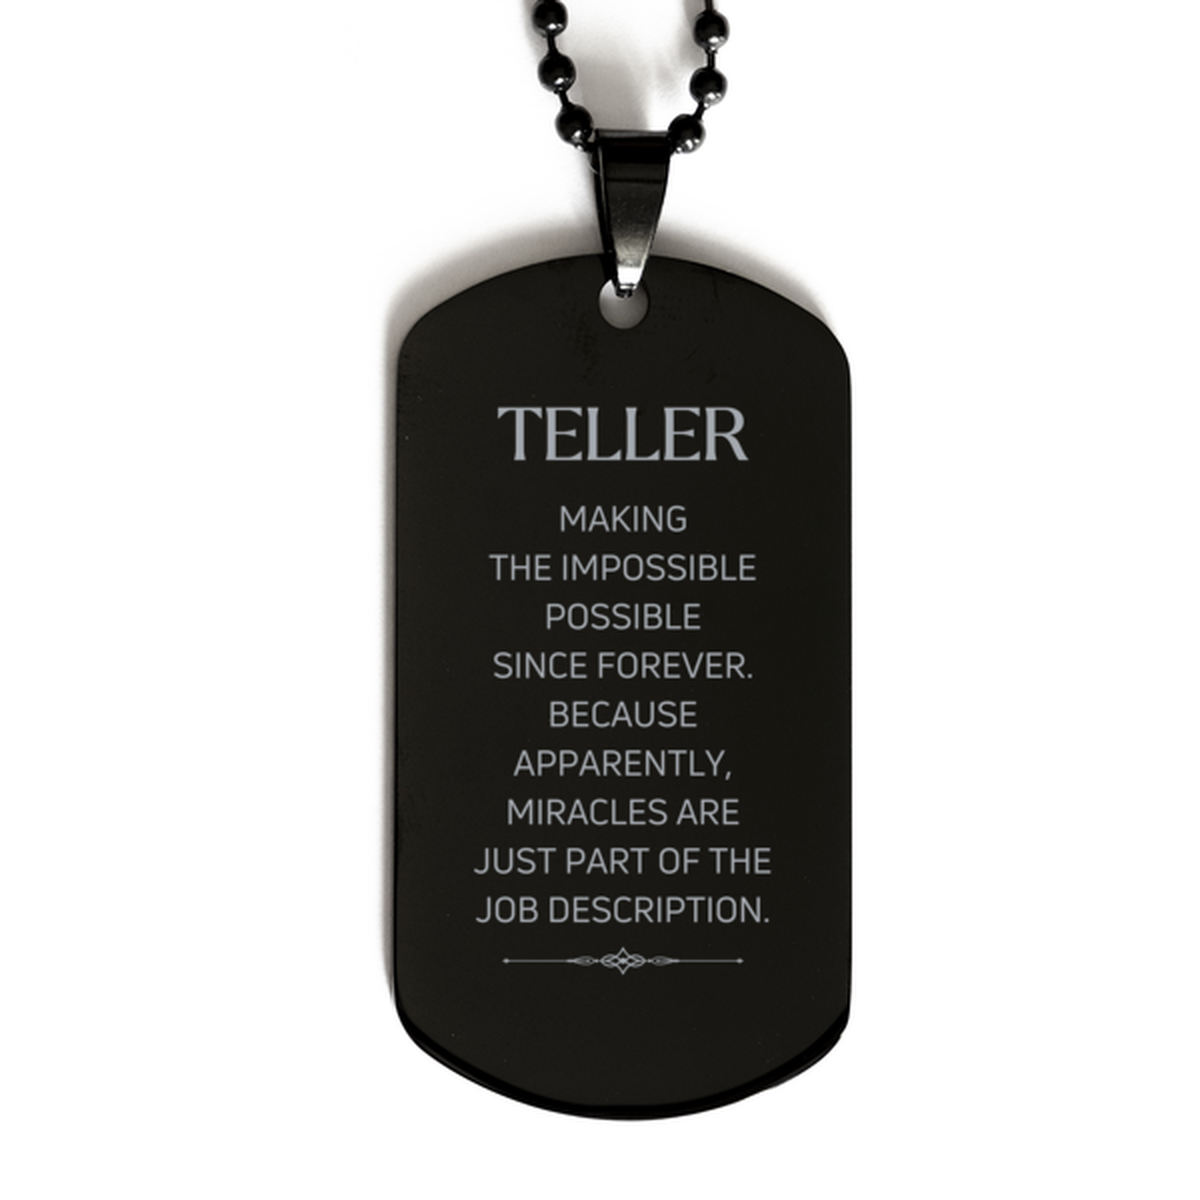 Funny Teller Gifts, Miracles are just part of the job description, Inspirational Birthday Black Dog Tag For Teller, Men, Women, Coworkers, Friends, Boss